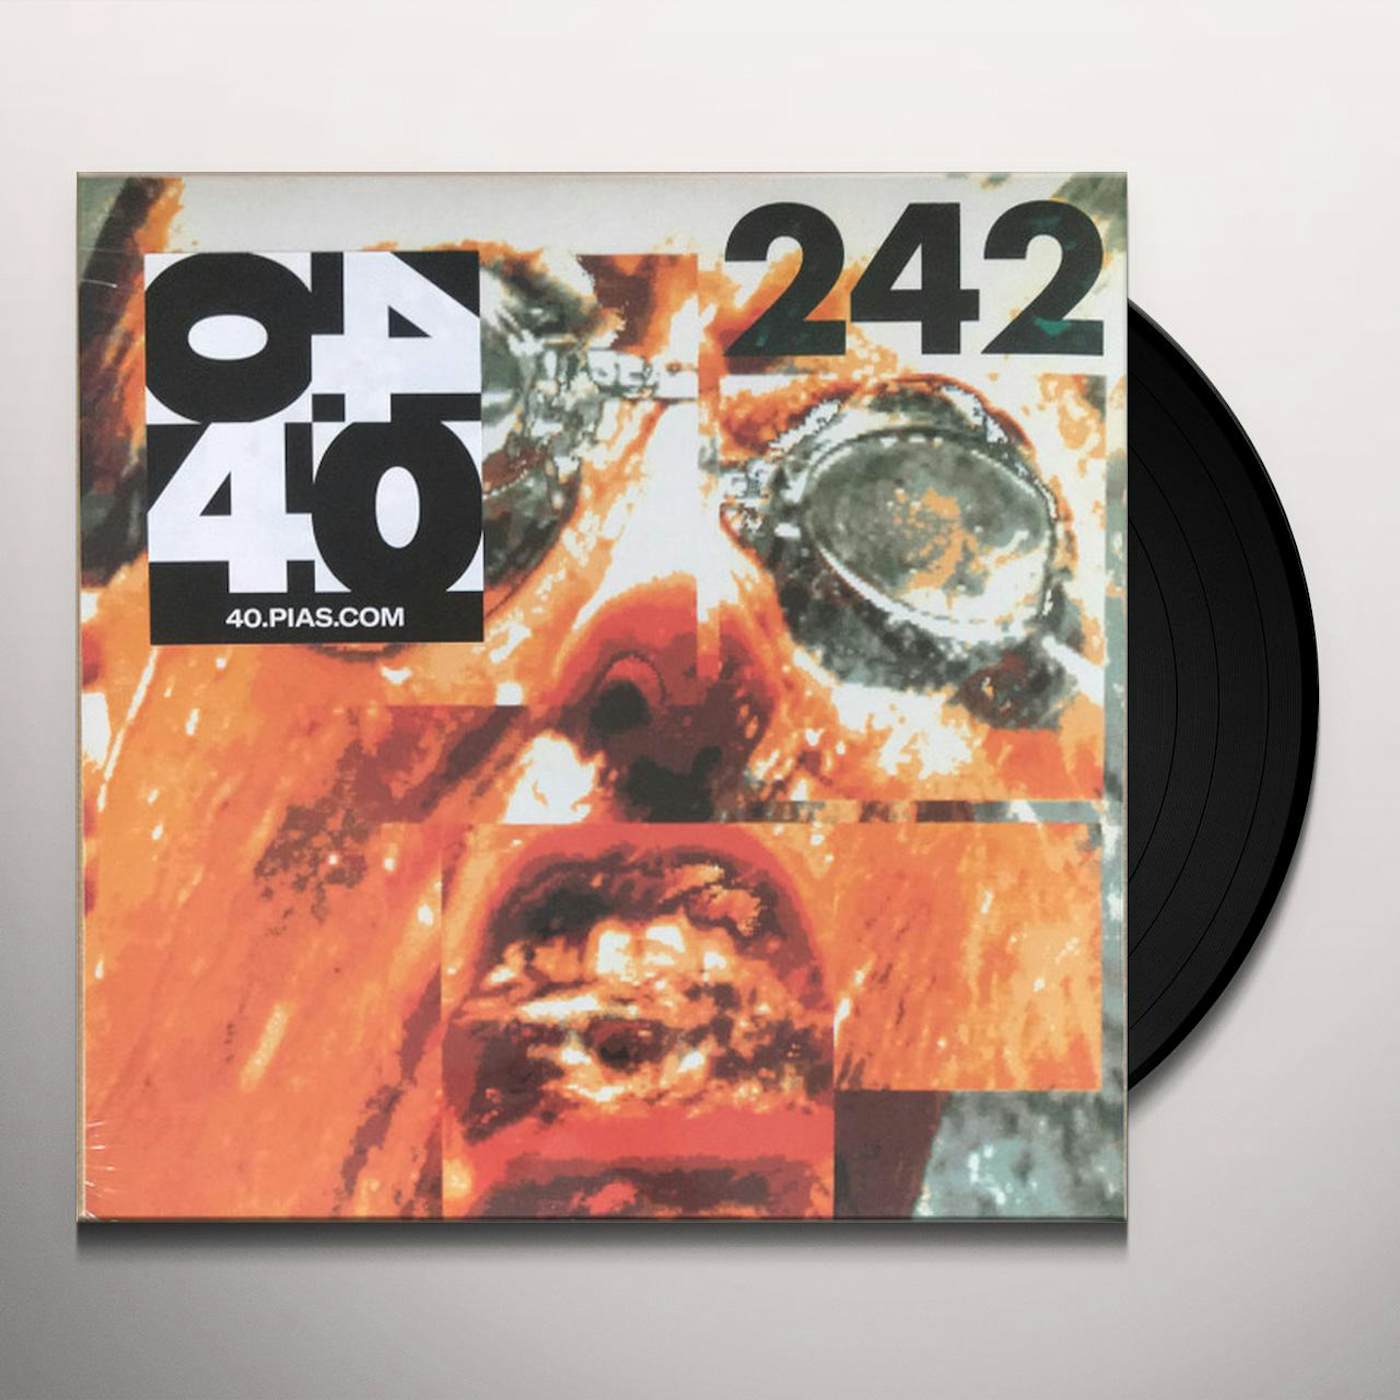 Front 242 TYRANNY (FOR YOU) Vinyl Record